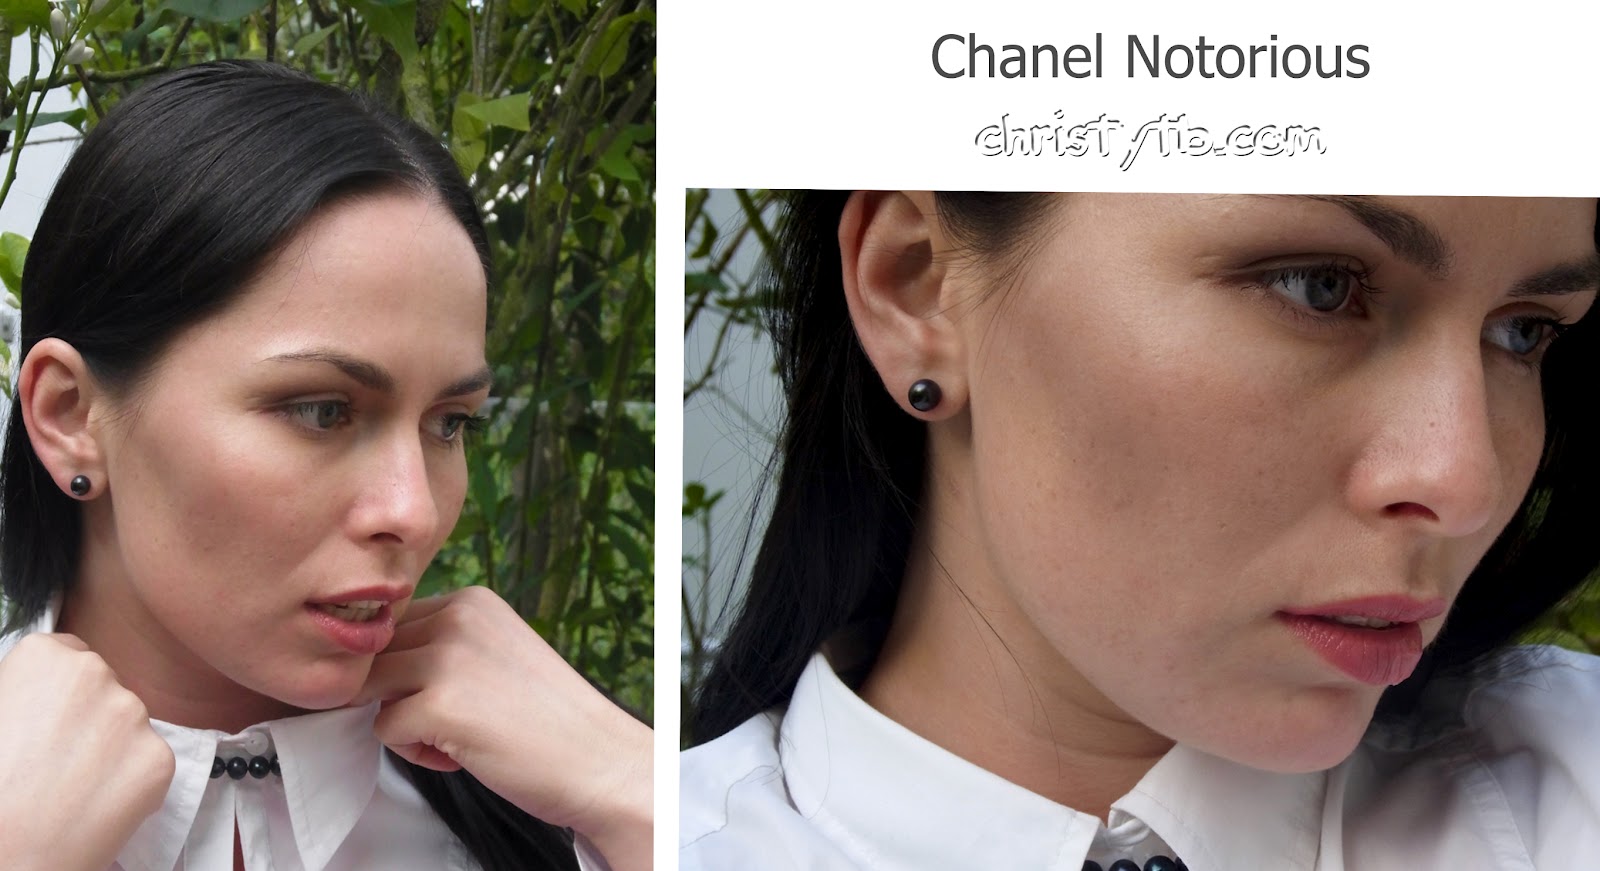 Christytb: Chanel Ombre Contraste Notorious (sculpting veil for eyes and  cheeks)